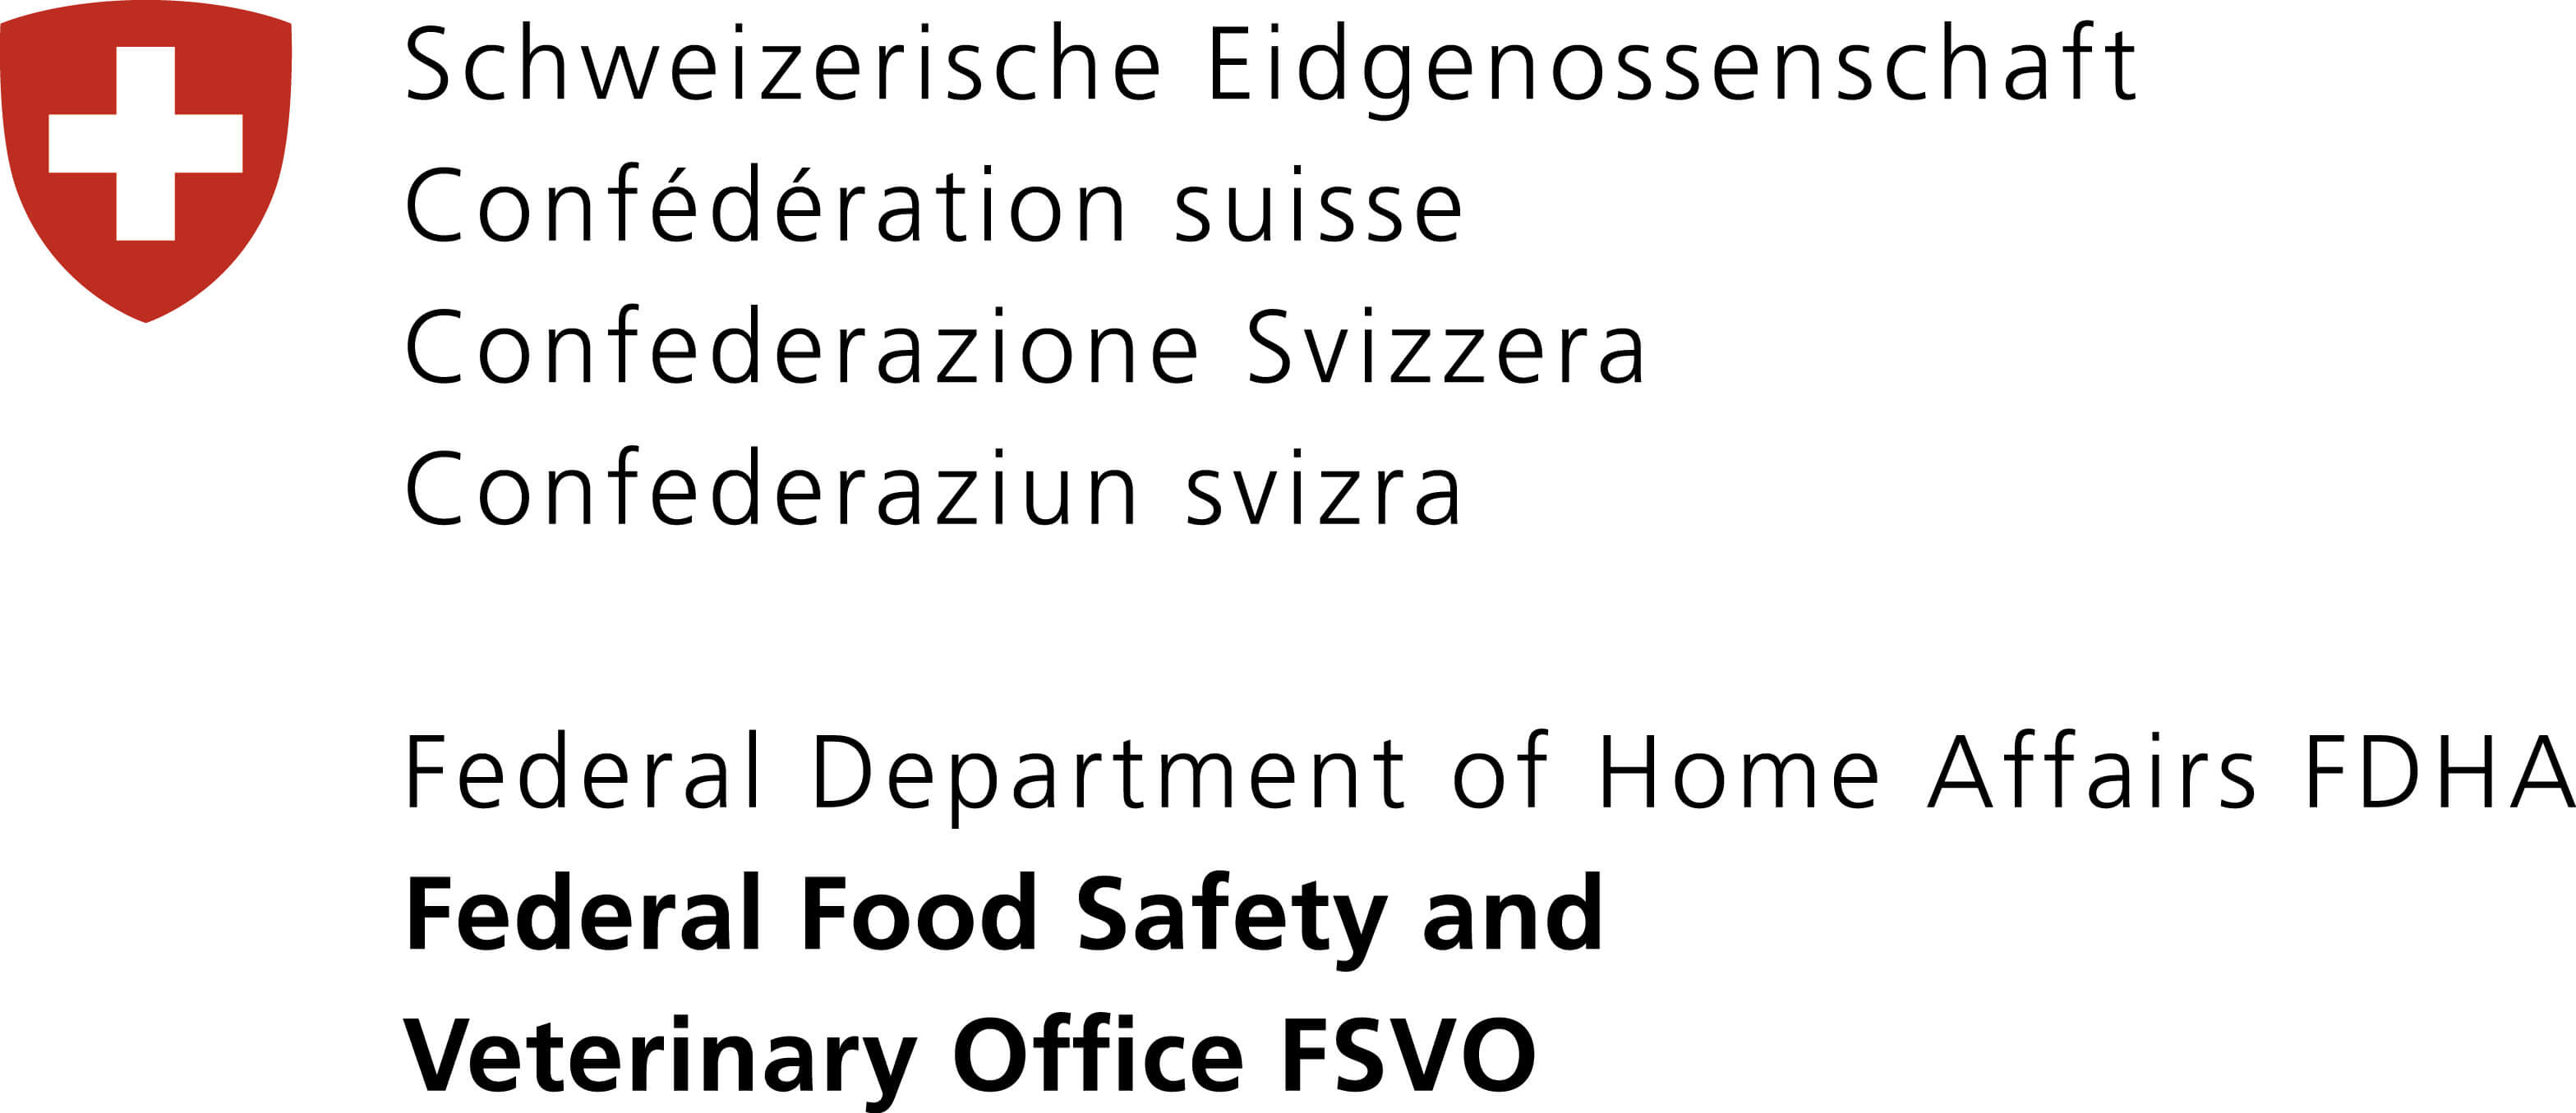 Federal Food Safety and Veterinary Office